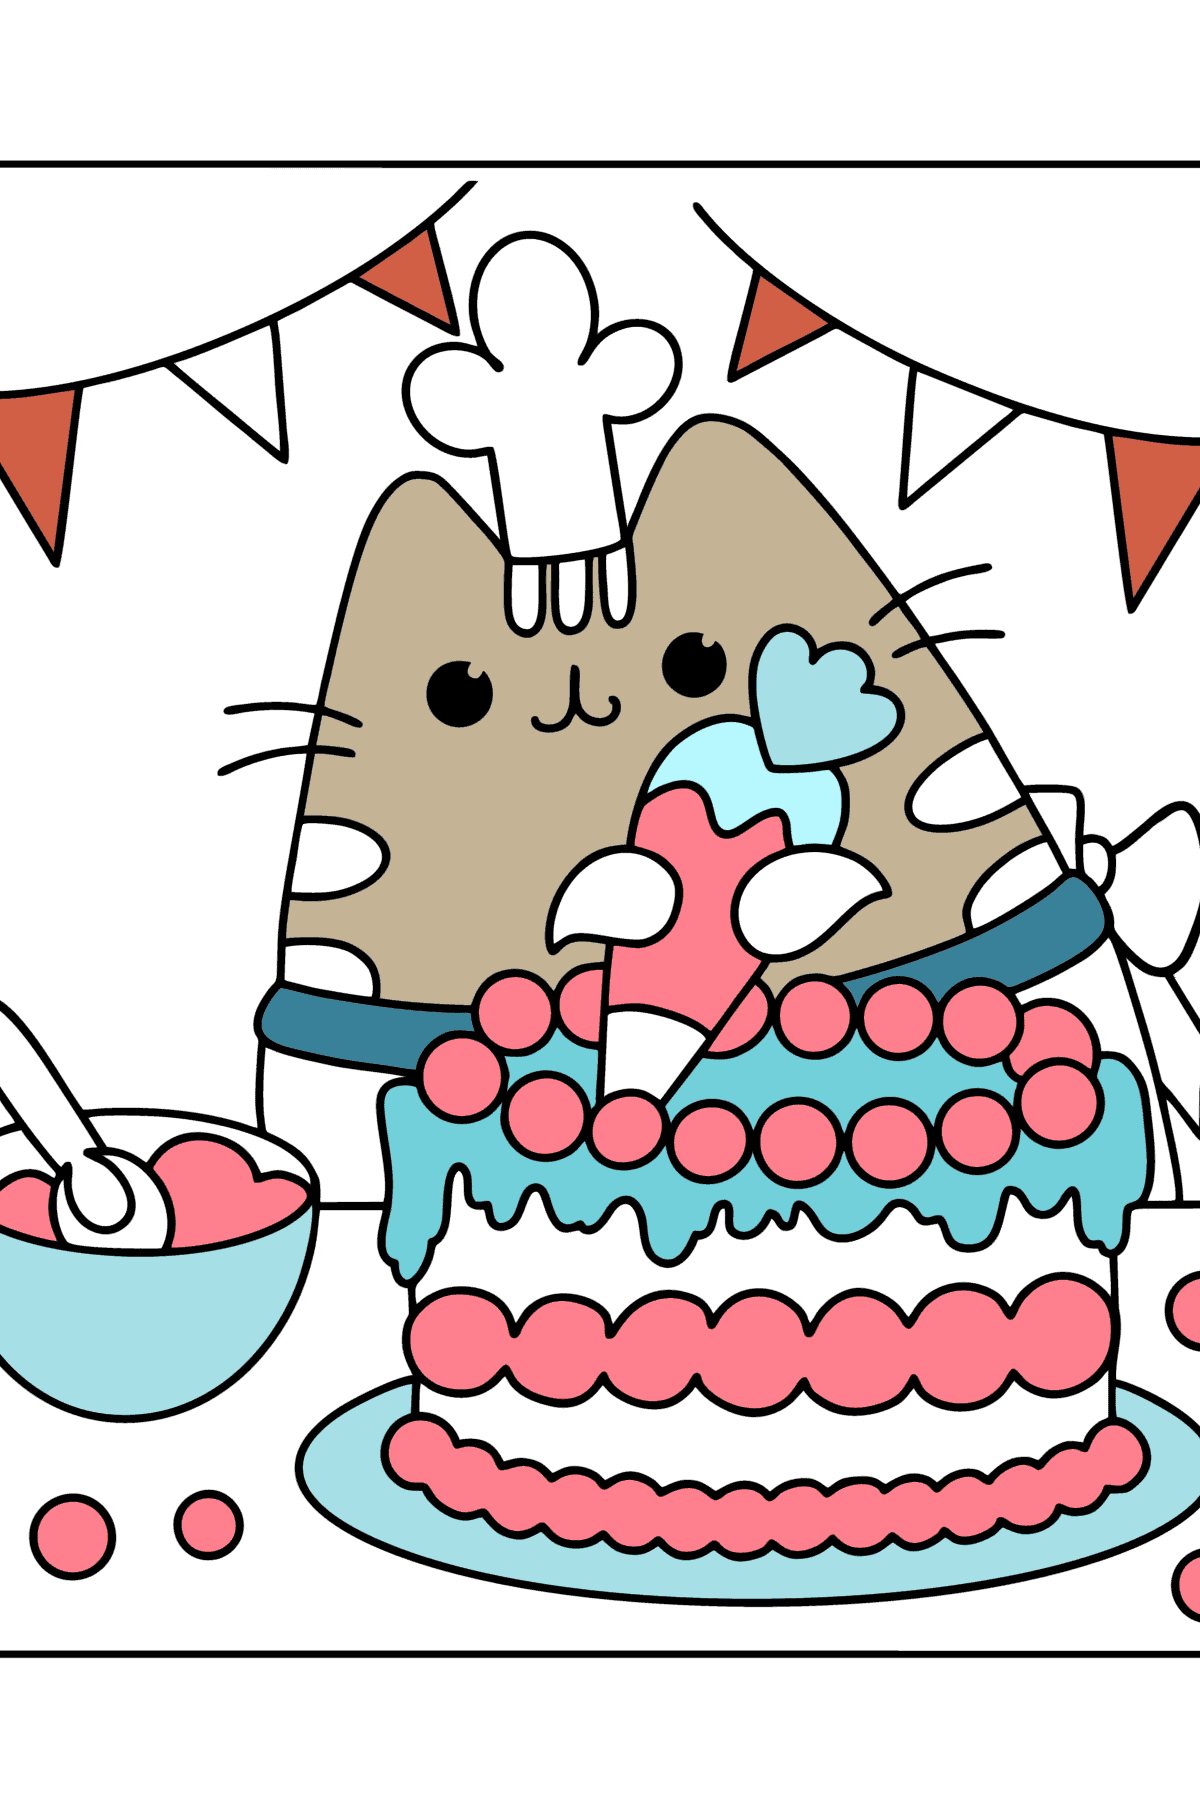 Pusheen birthday сolouring page - Coloring Pages for Kids